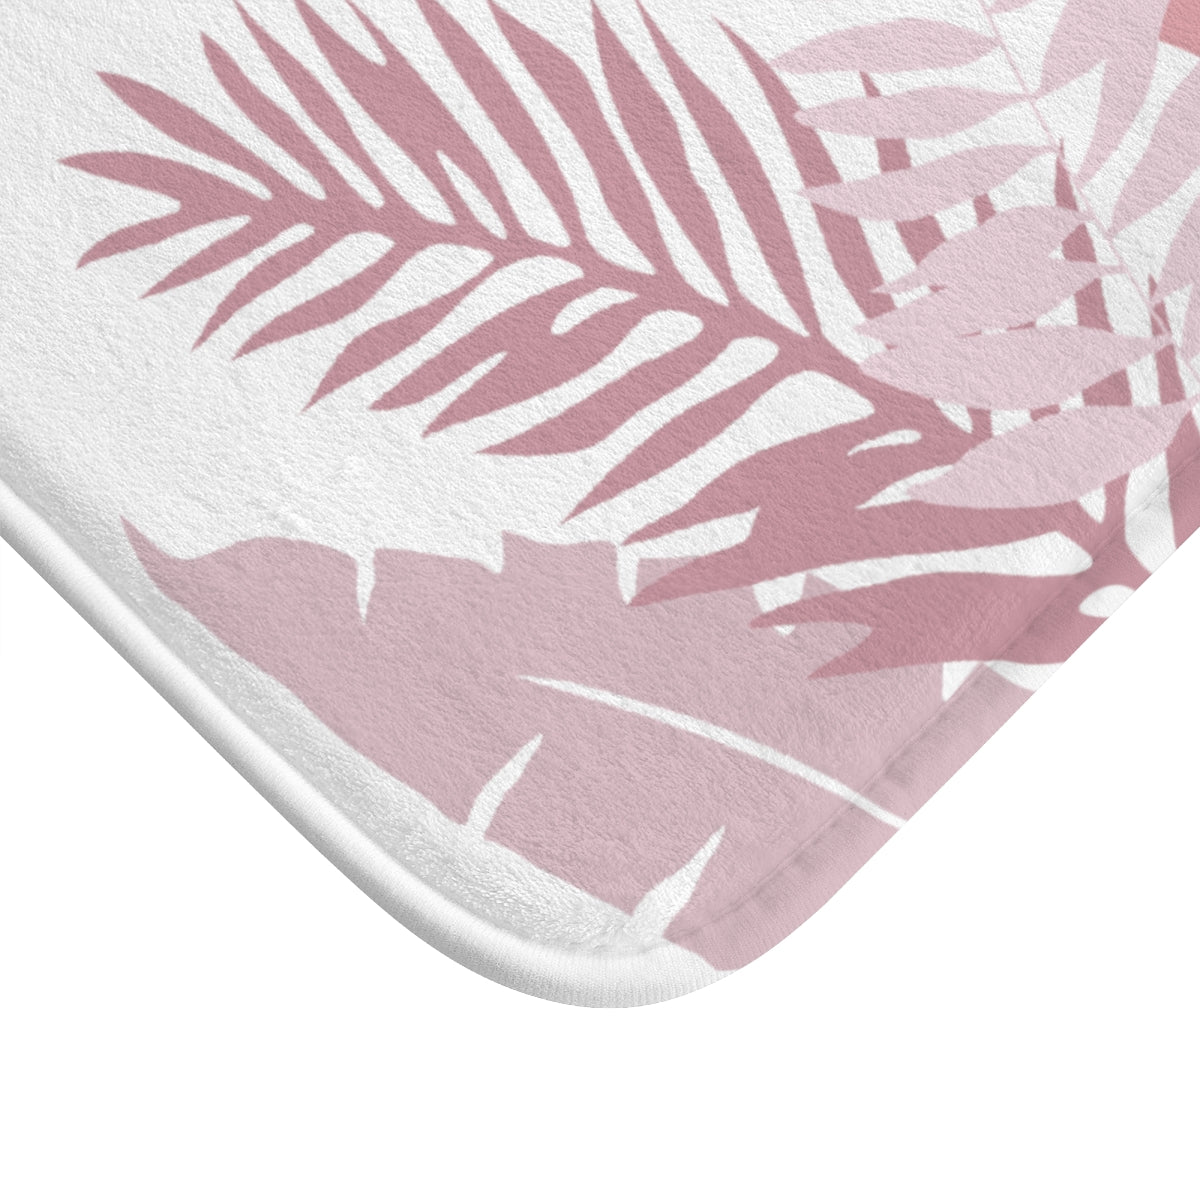 Bath Mat- Whispering Leaves in Pink